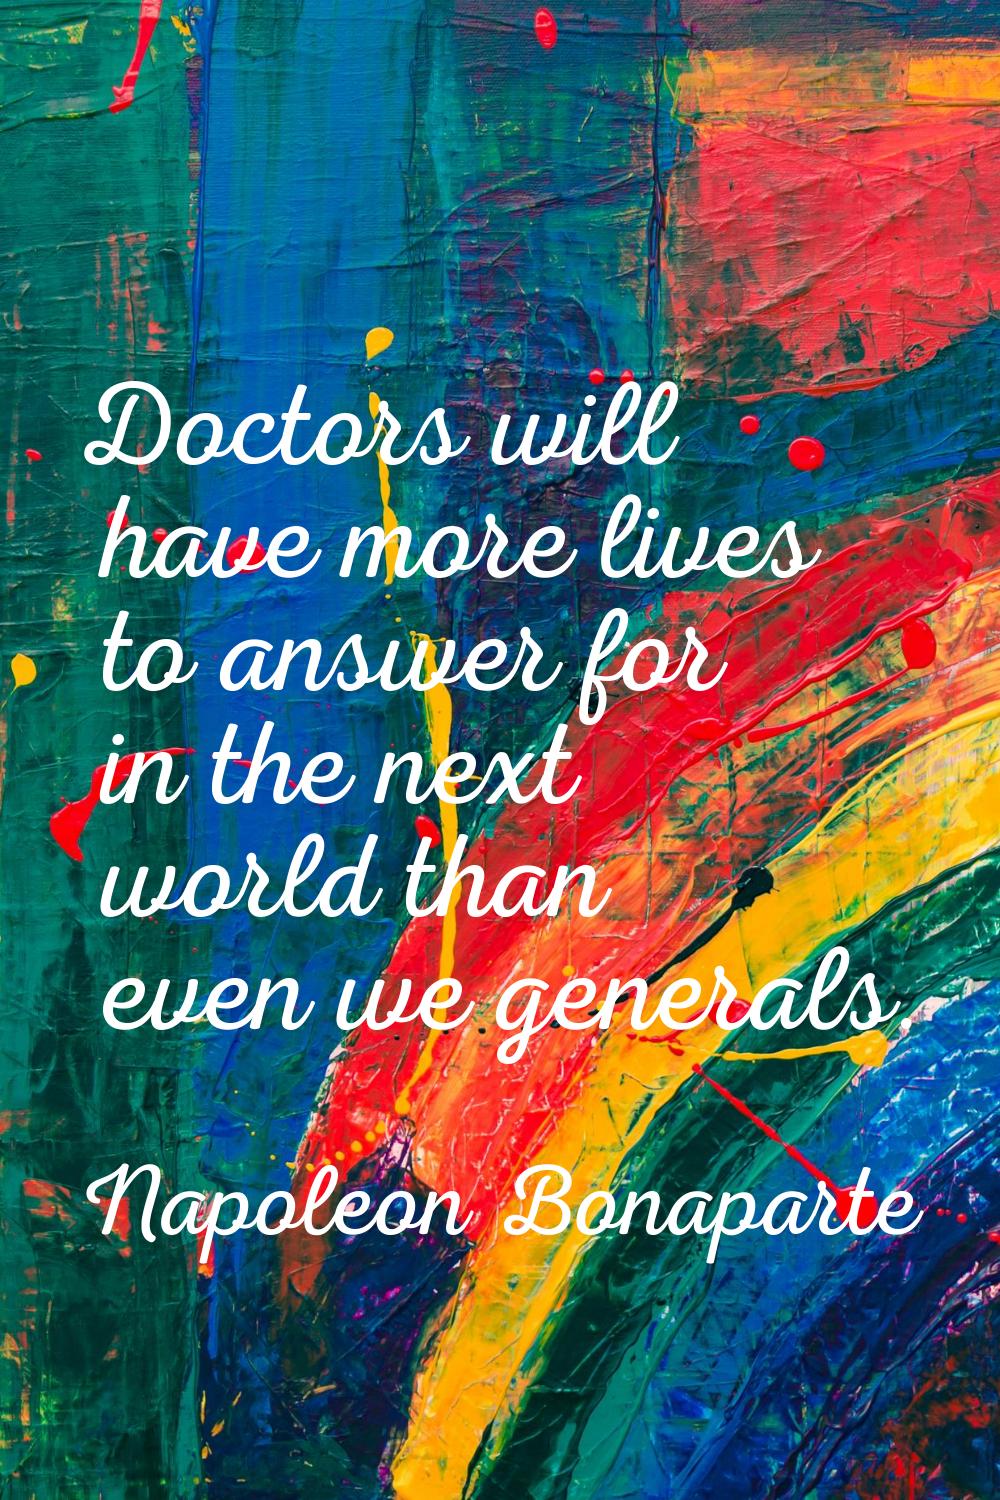 Doctors will have more lives to answer for in the next world than even we generals.